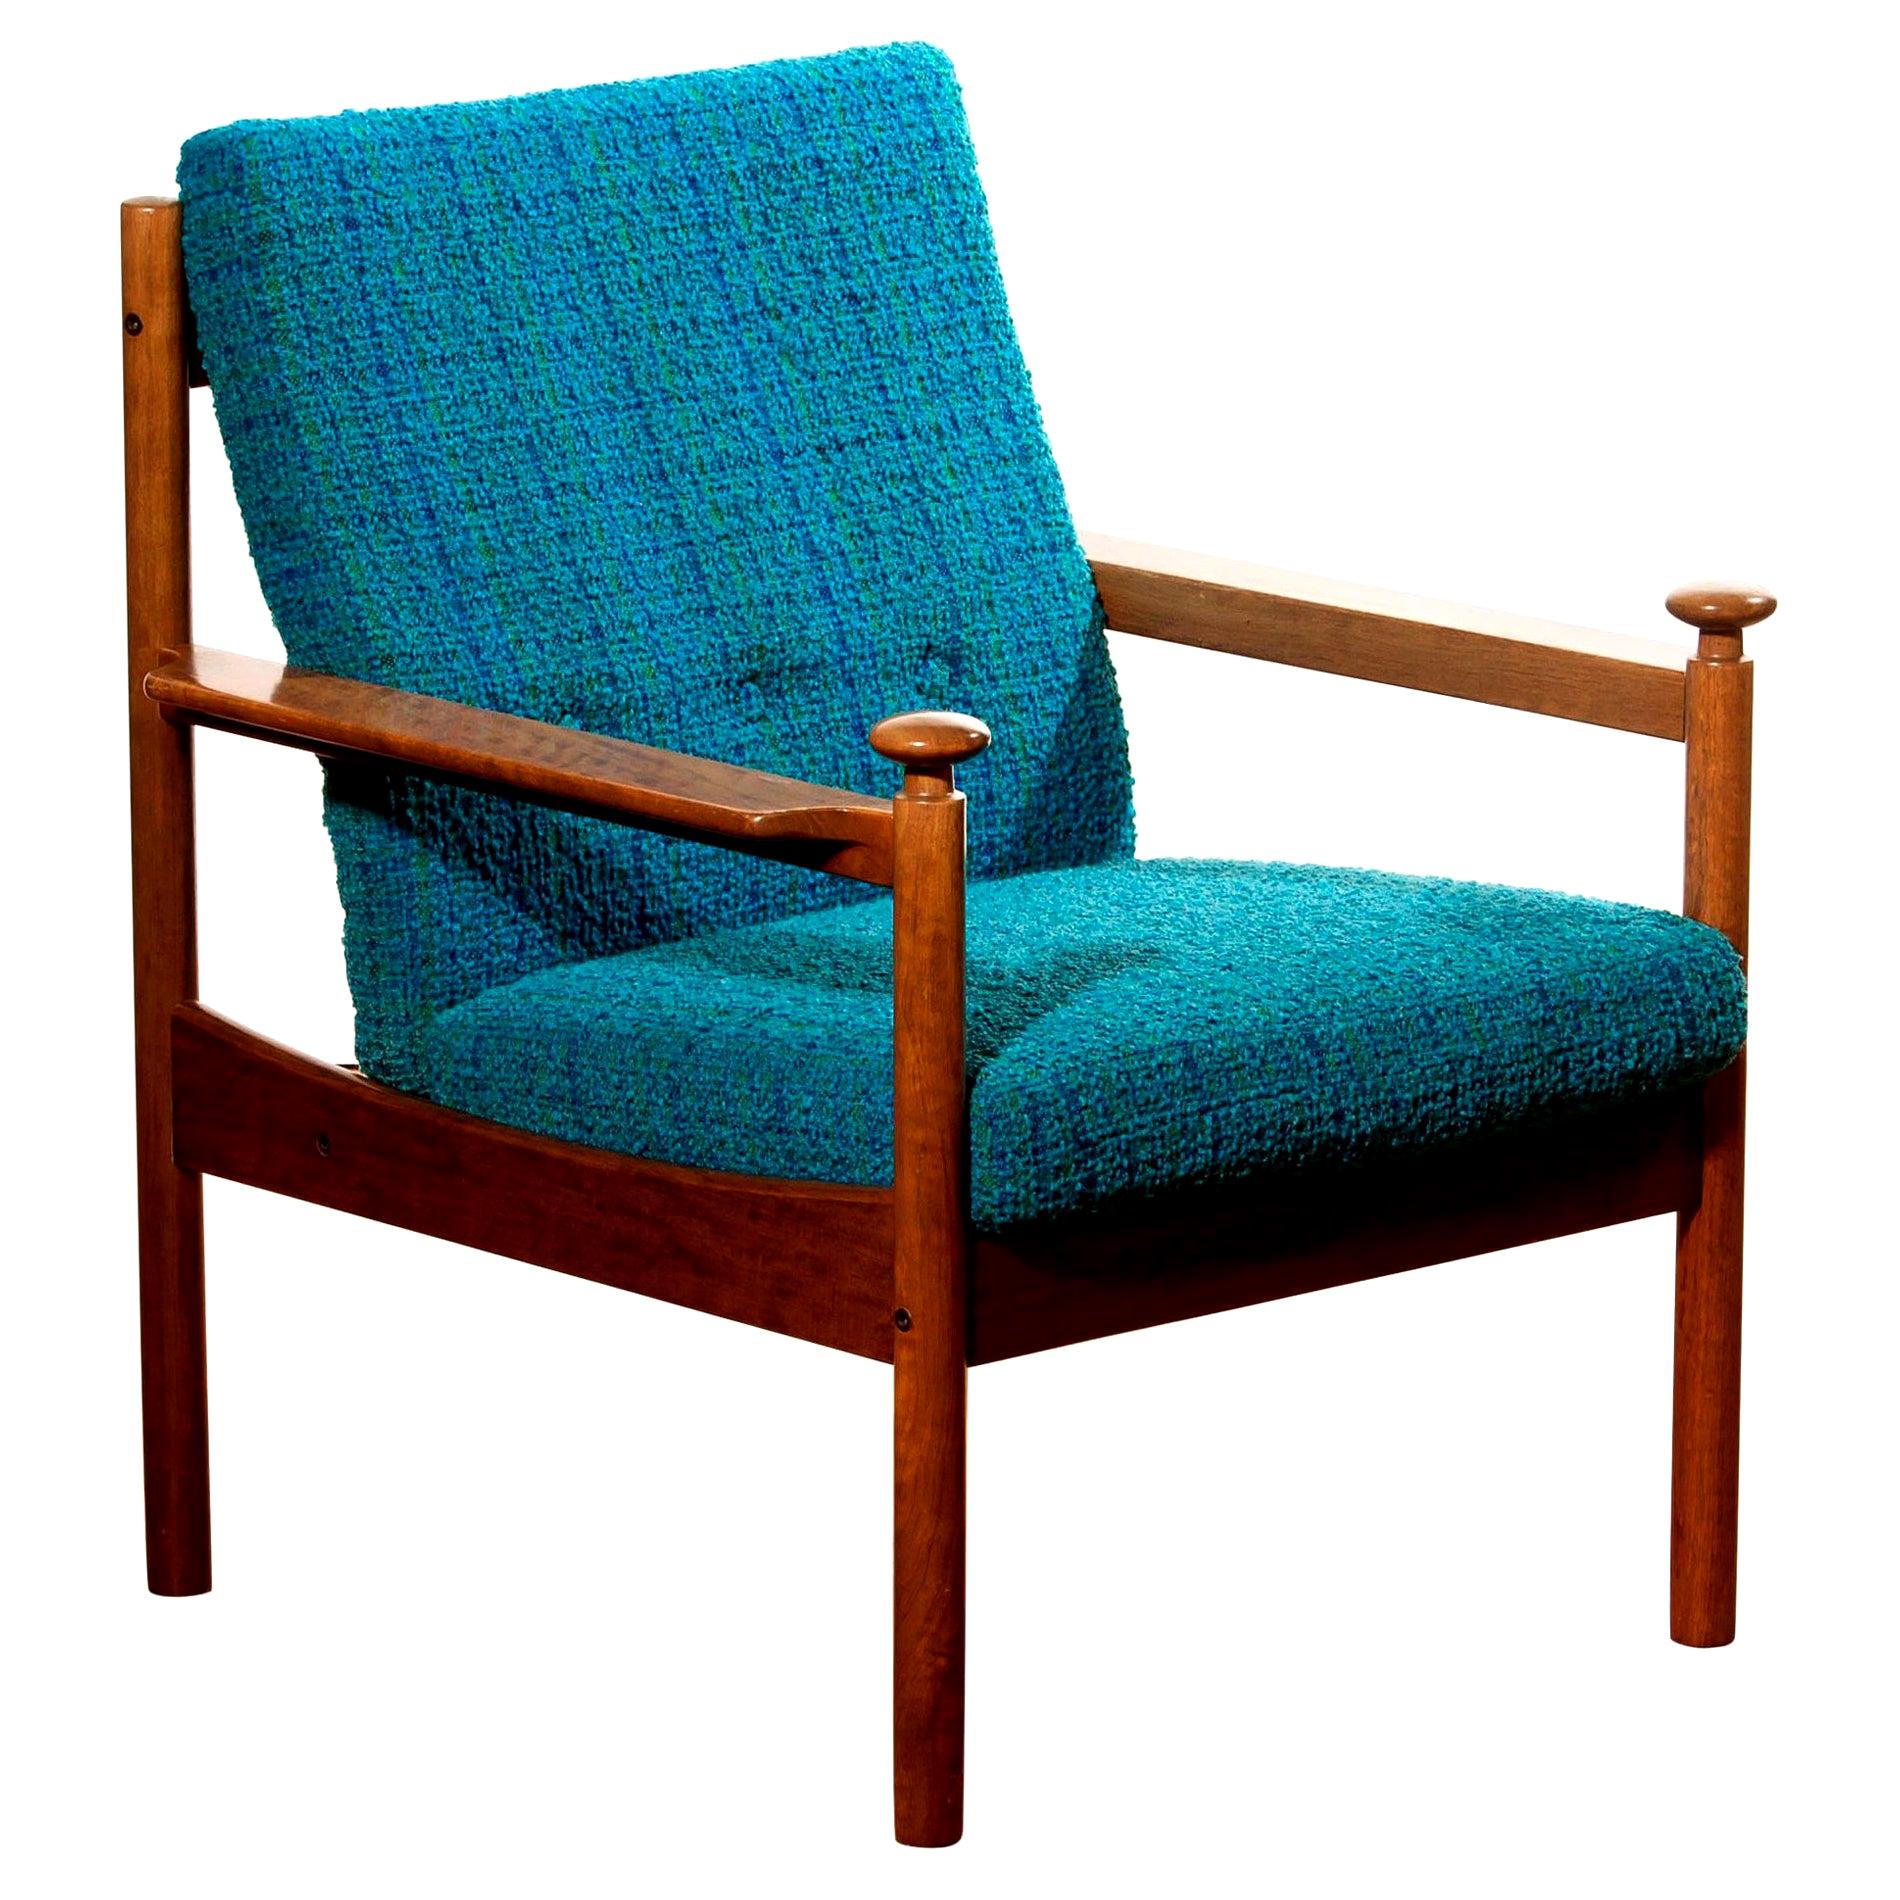 Beautiful chair designed by Torbjørn Afdal for Sandvik & Co. Mobler, Norway.
The wooden frame with the blue fabric cushions makes it a very nice combination.
The frame is in a good condition, only the cushions need a refilling. 
Period: